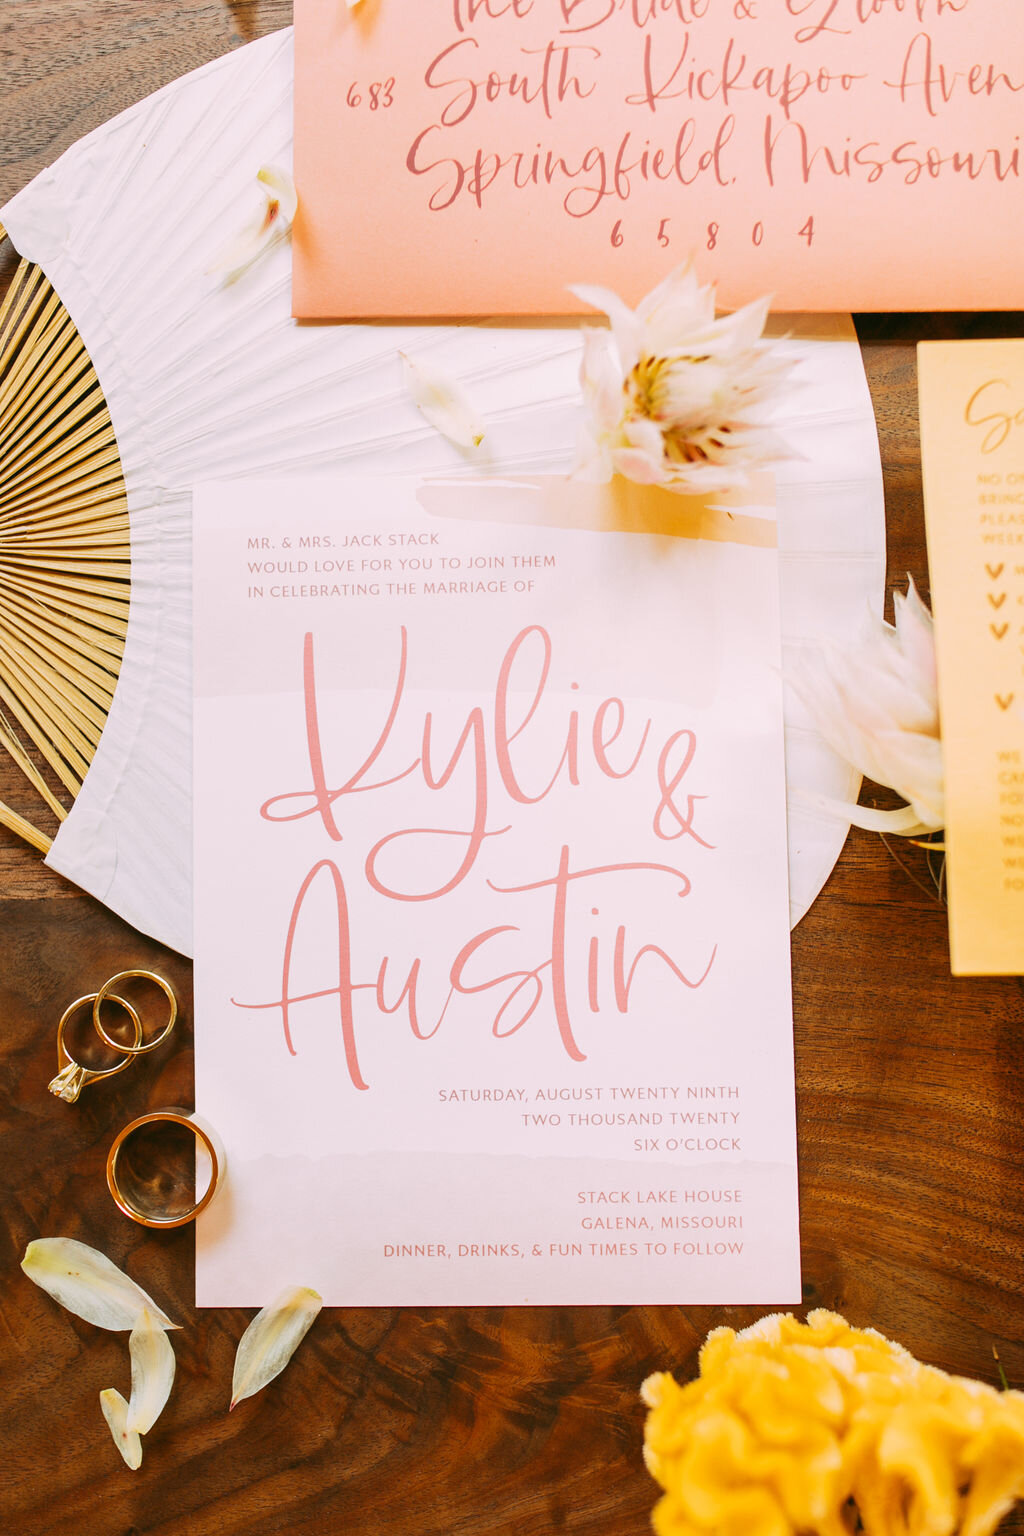 Cheerful and bright wedding invitation suite